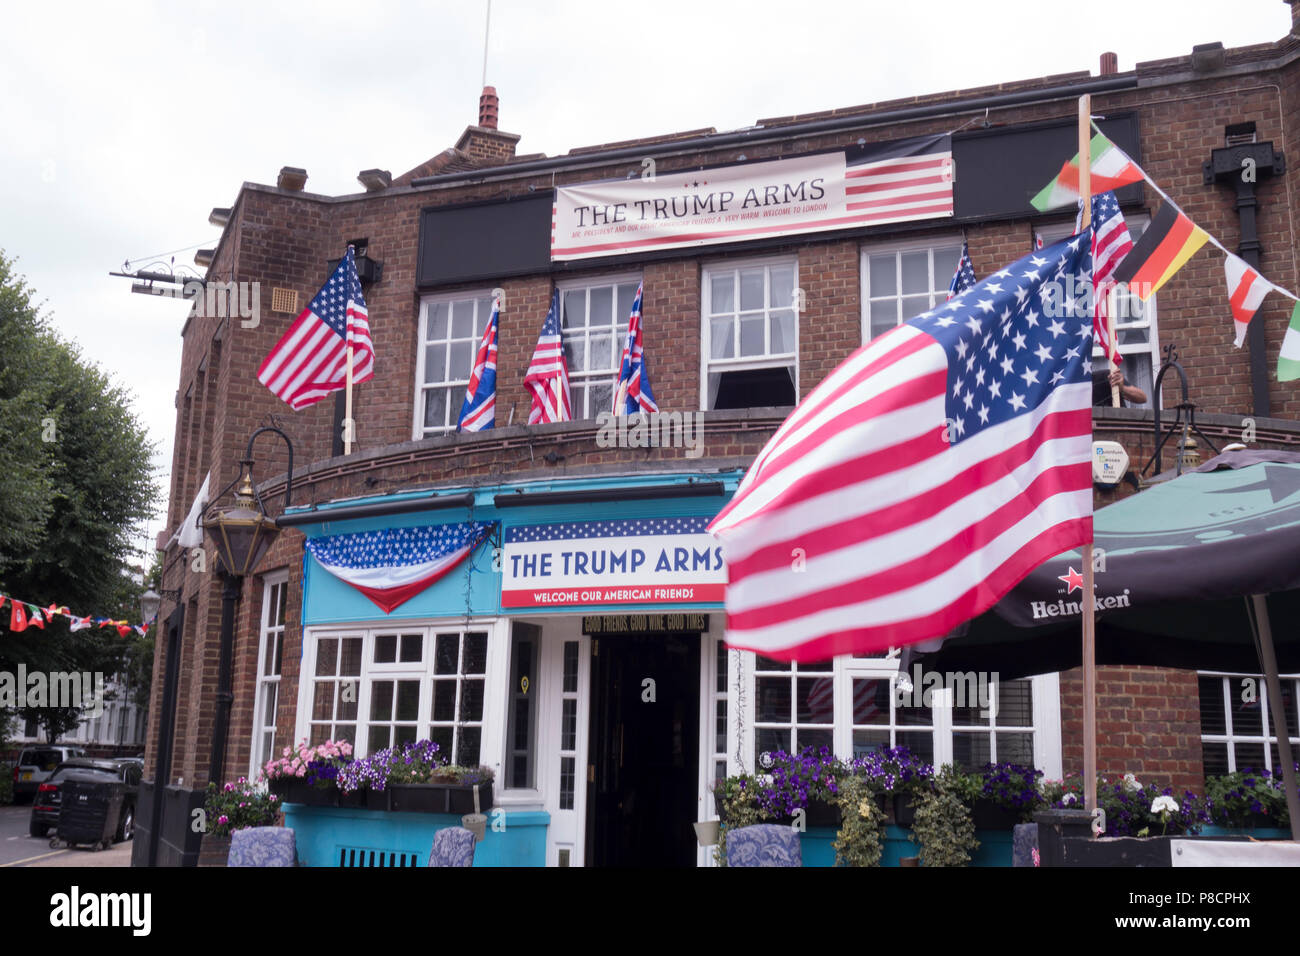 London, UK. 10th July 2018: The Jamesons Pub in west Kensington changes its name to 'The Trump Arms' to support the visit of the US president. Credit: William Barton. Credit: William Barton/Alamy Live News Stock Photo